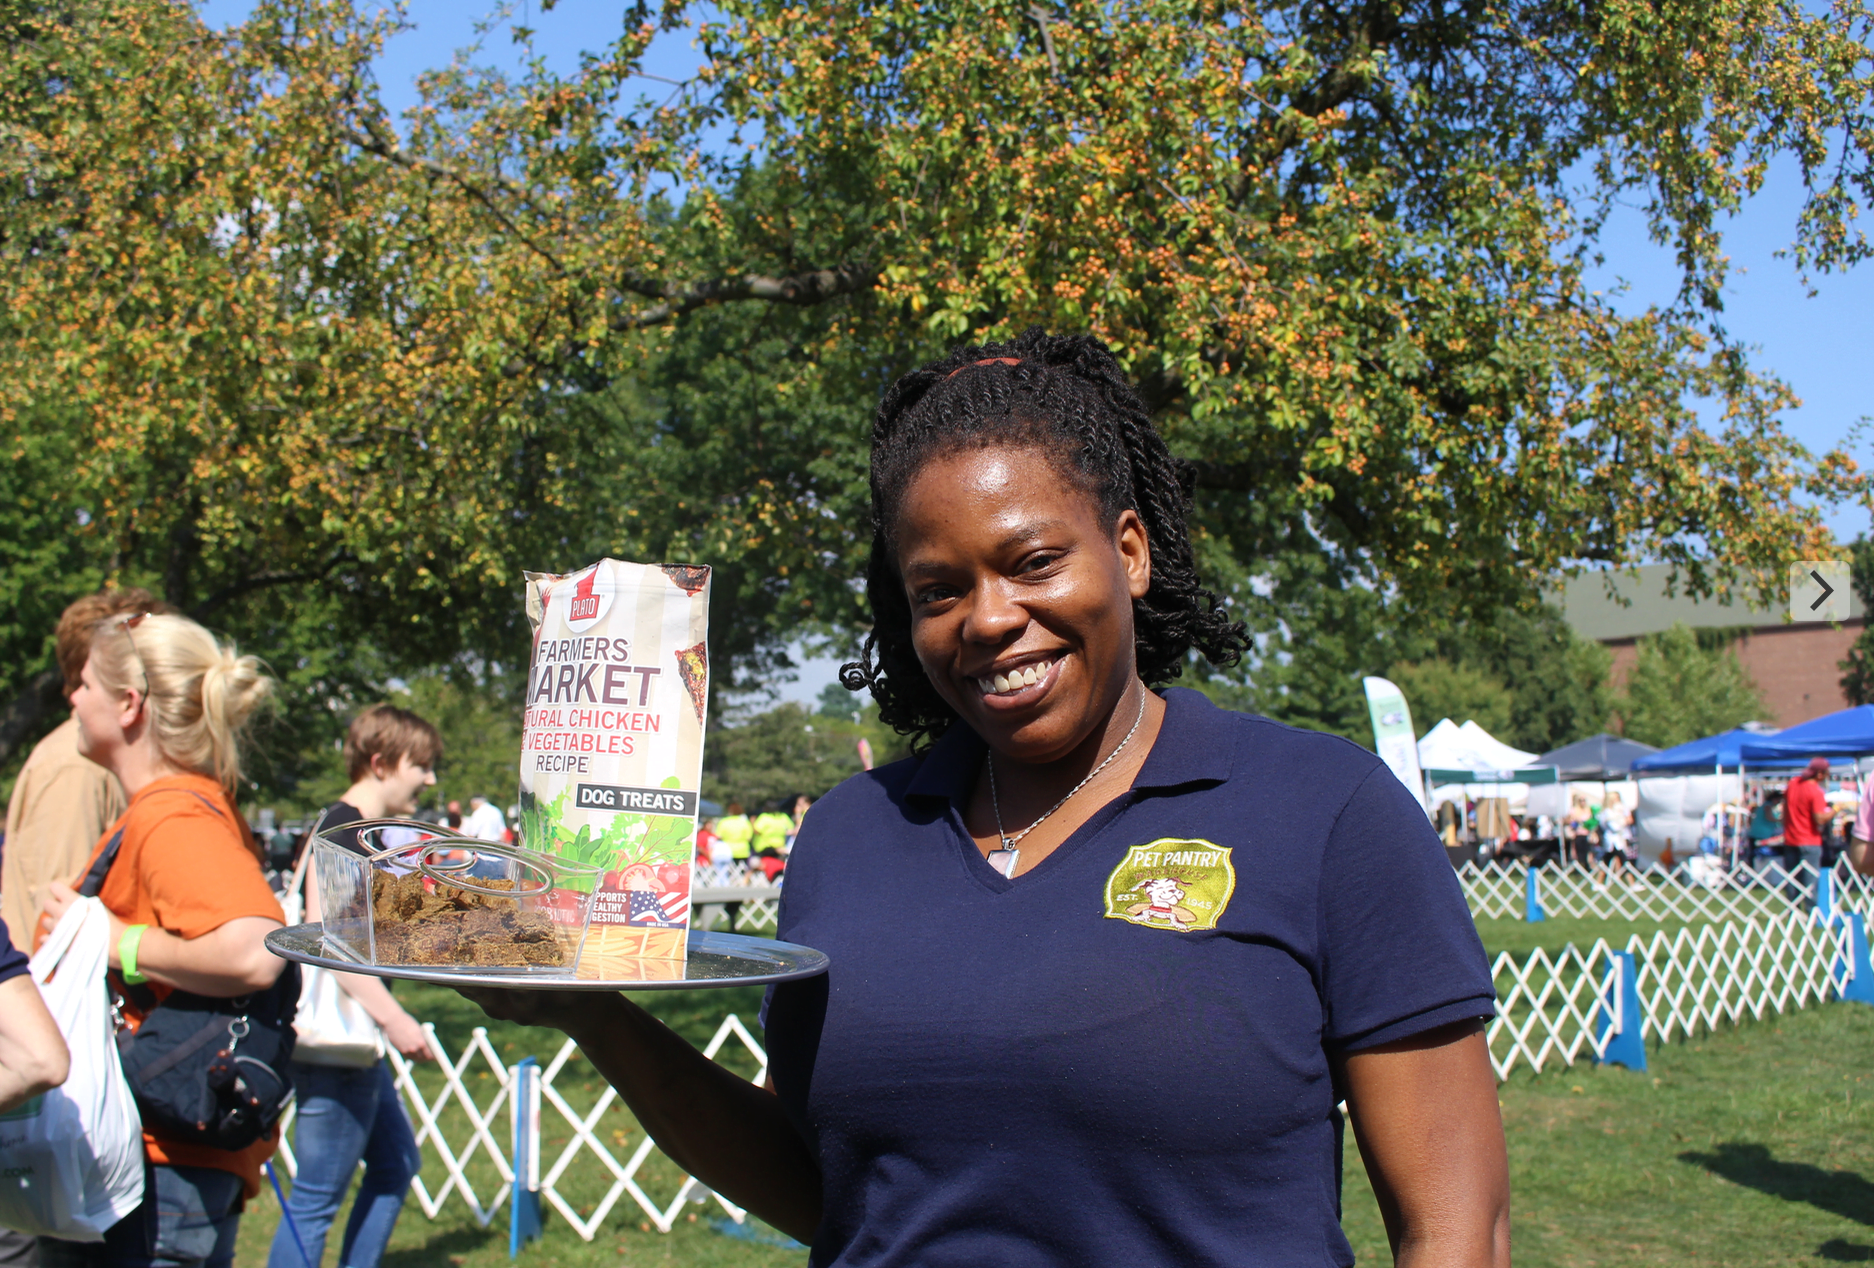 Karen from Pet Pantry passed out treats courtesy of even sponsor Pet Pantry Warehouse. Sept 17, 2017 Photo: Leslie Yager